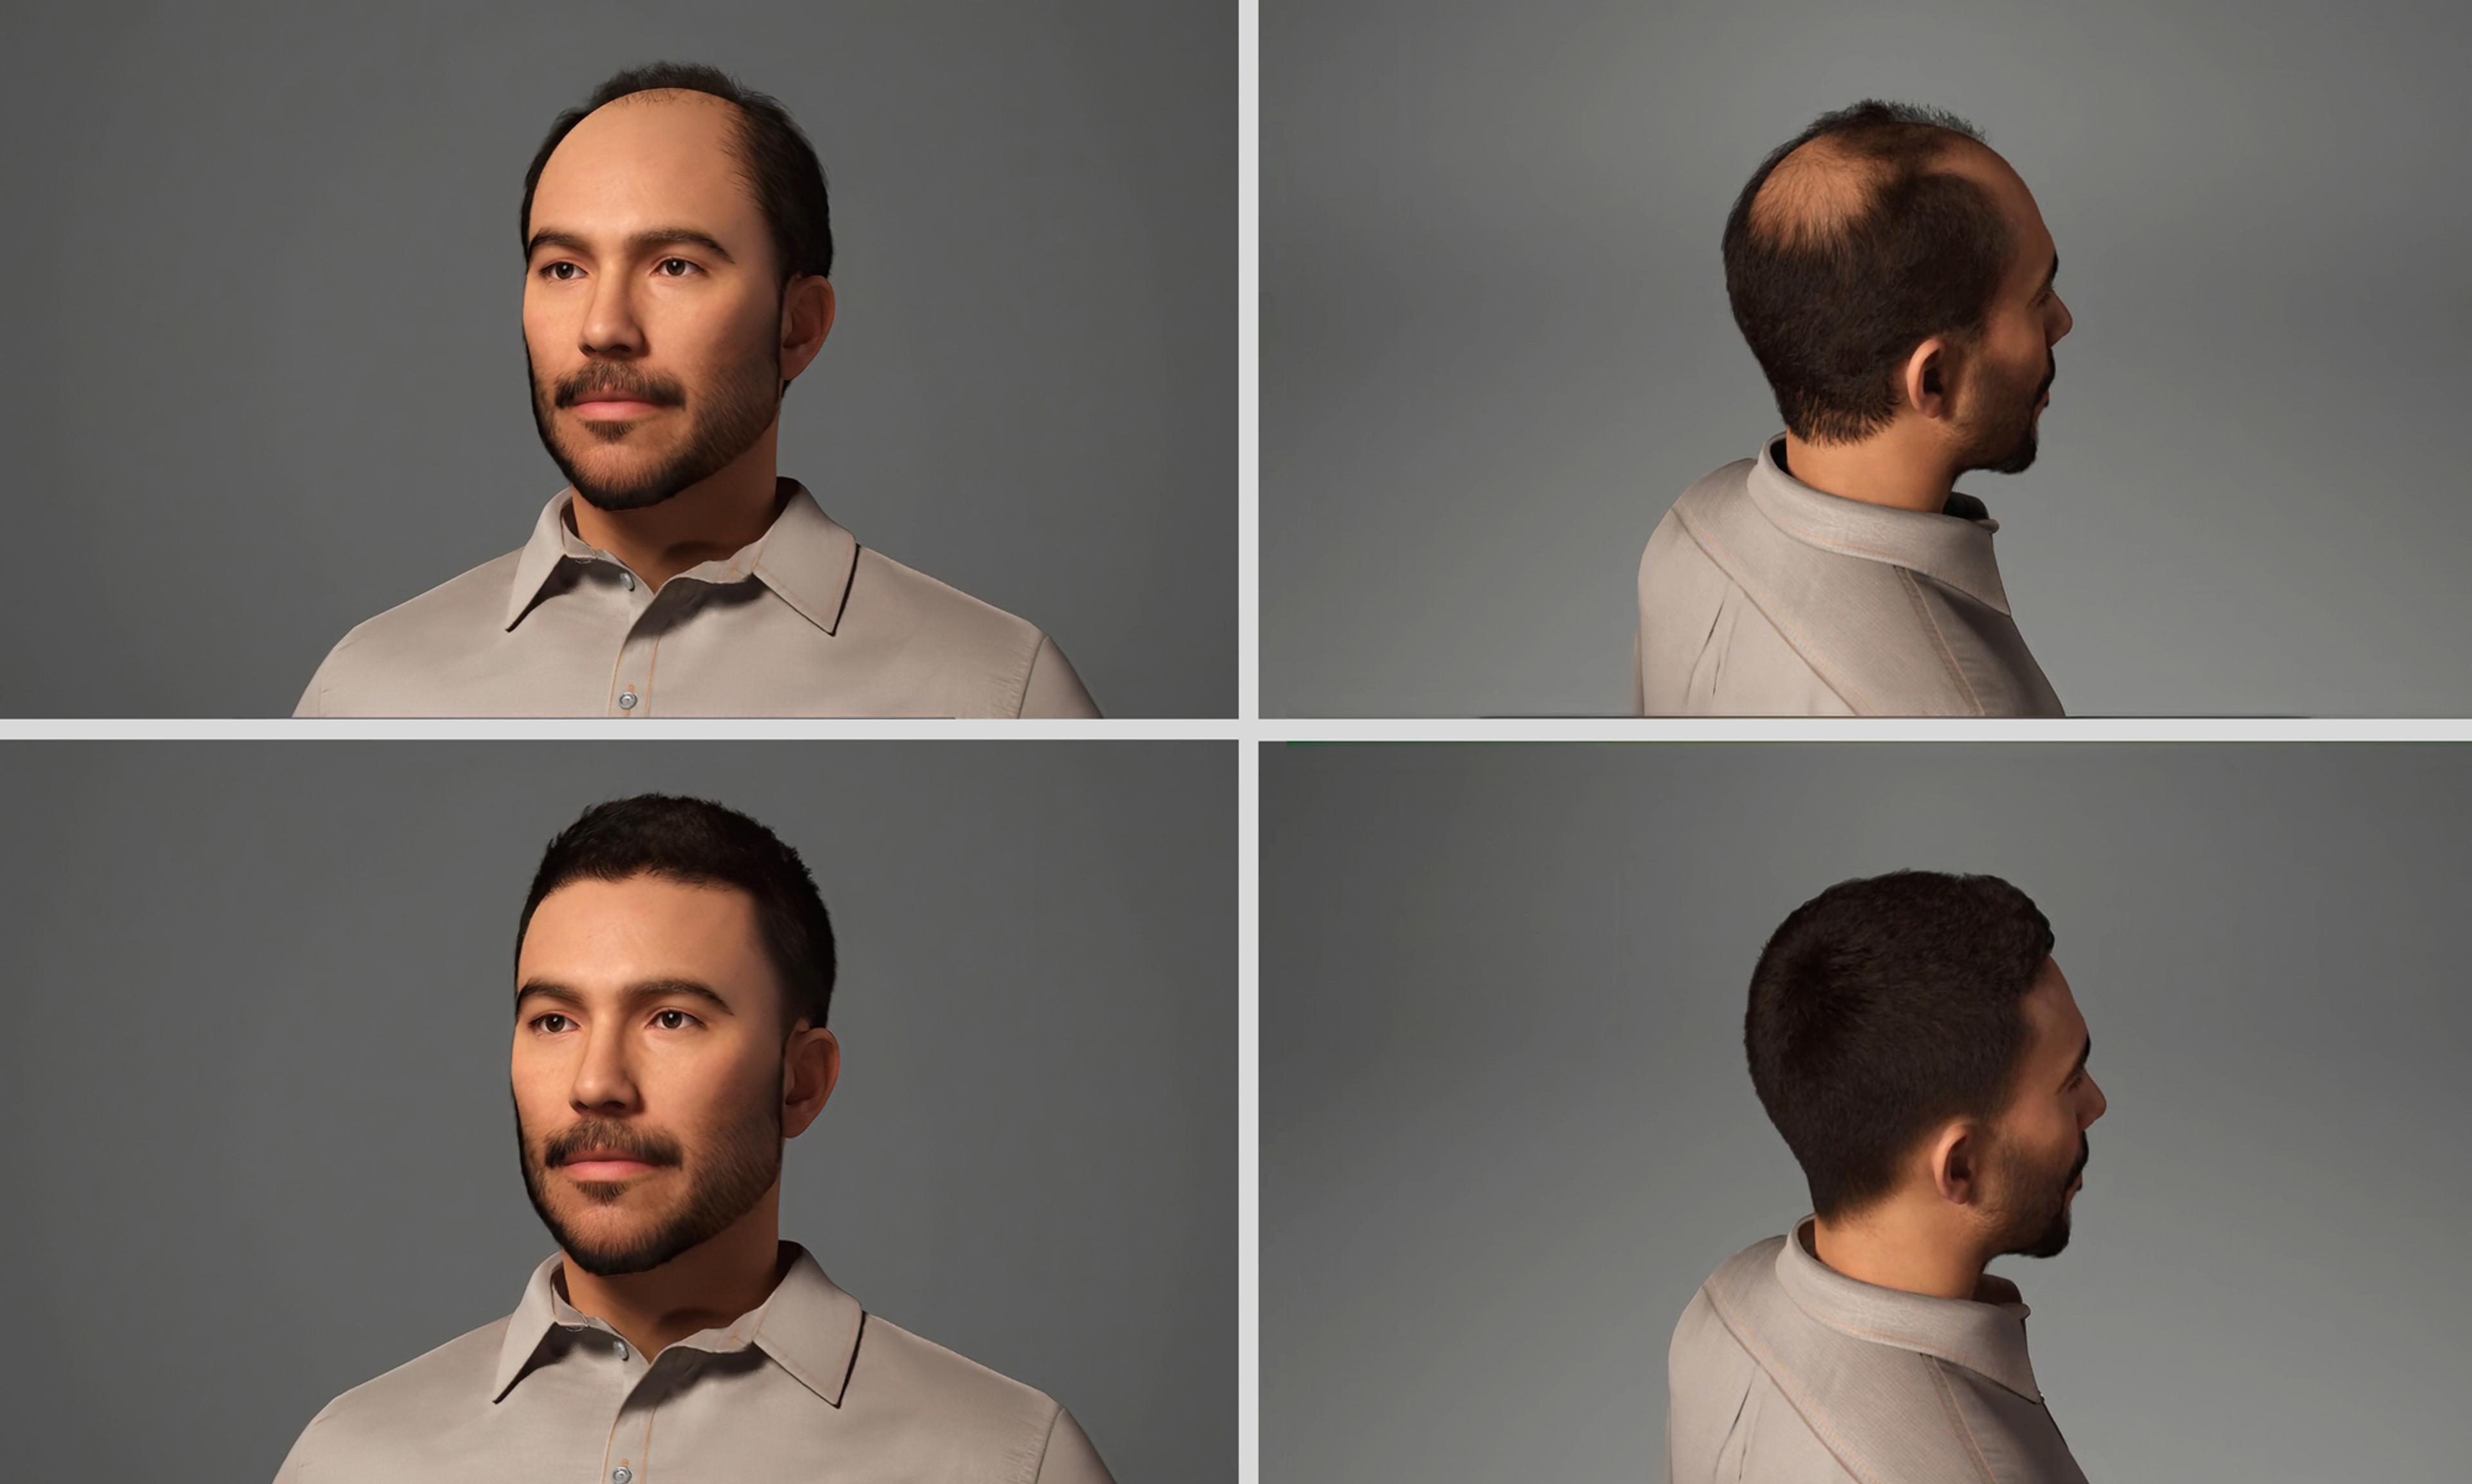 3D rendering of Asian man with hair loss at different stages of the Hamilton-Norwood scale.